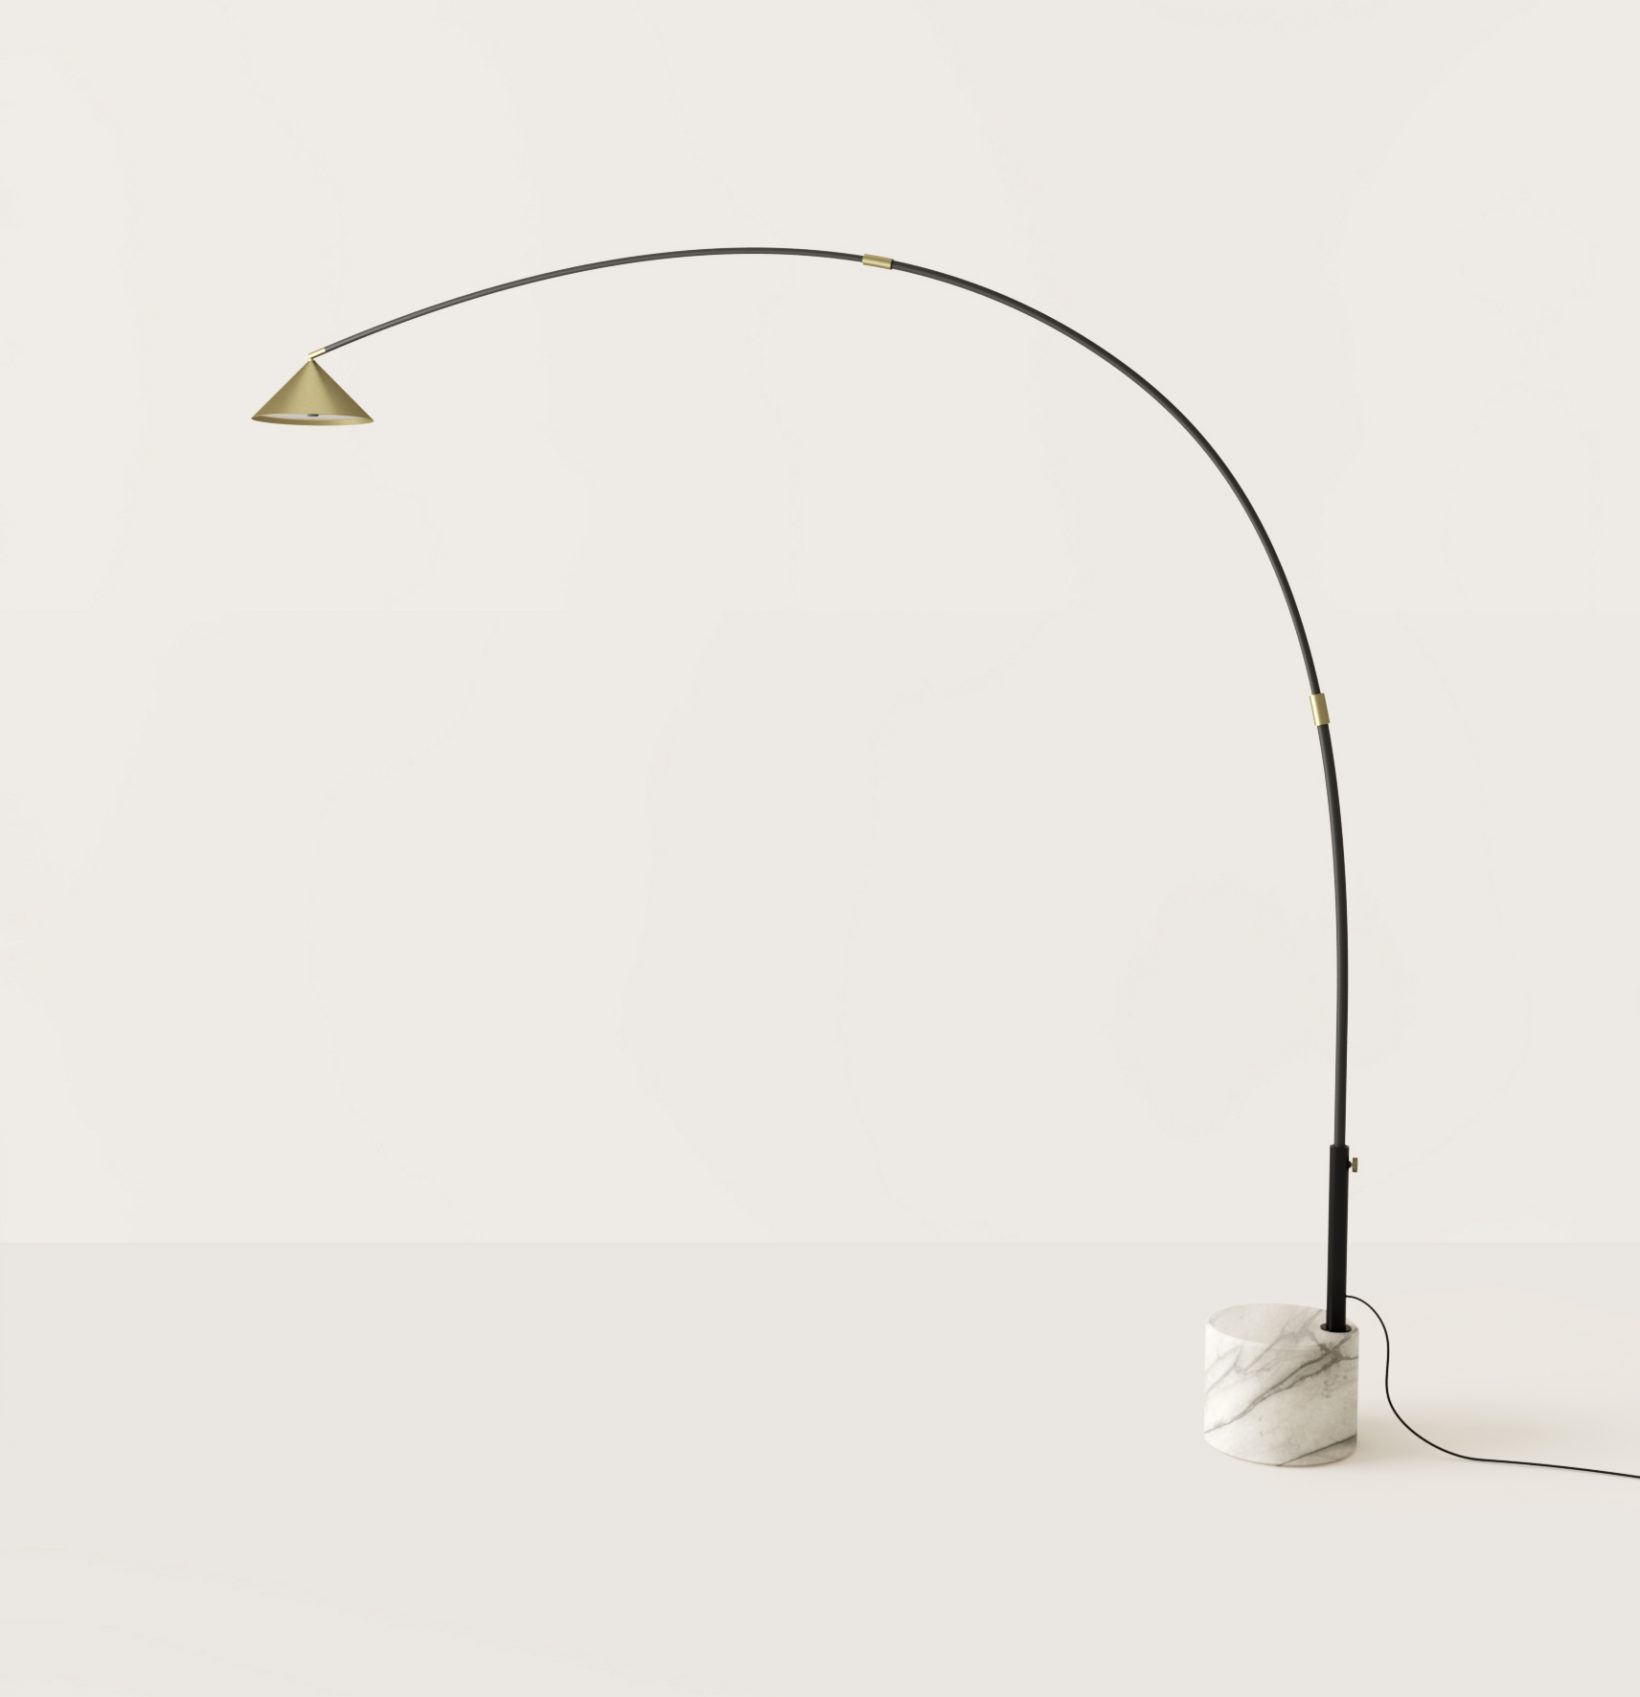 Aromas Hinoo Floor Lamp by Olson and Baker - Designer & Contemporary Sofas, Furniture - Olson and Baker showcases original designs from authentic, designer brands. Buy contemporary furniture, lighting, storage, sofas & chairs at Olson + Baker.